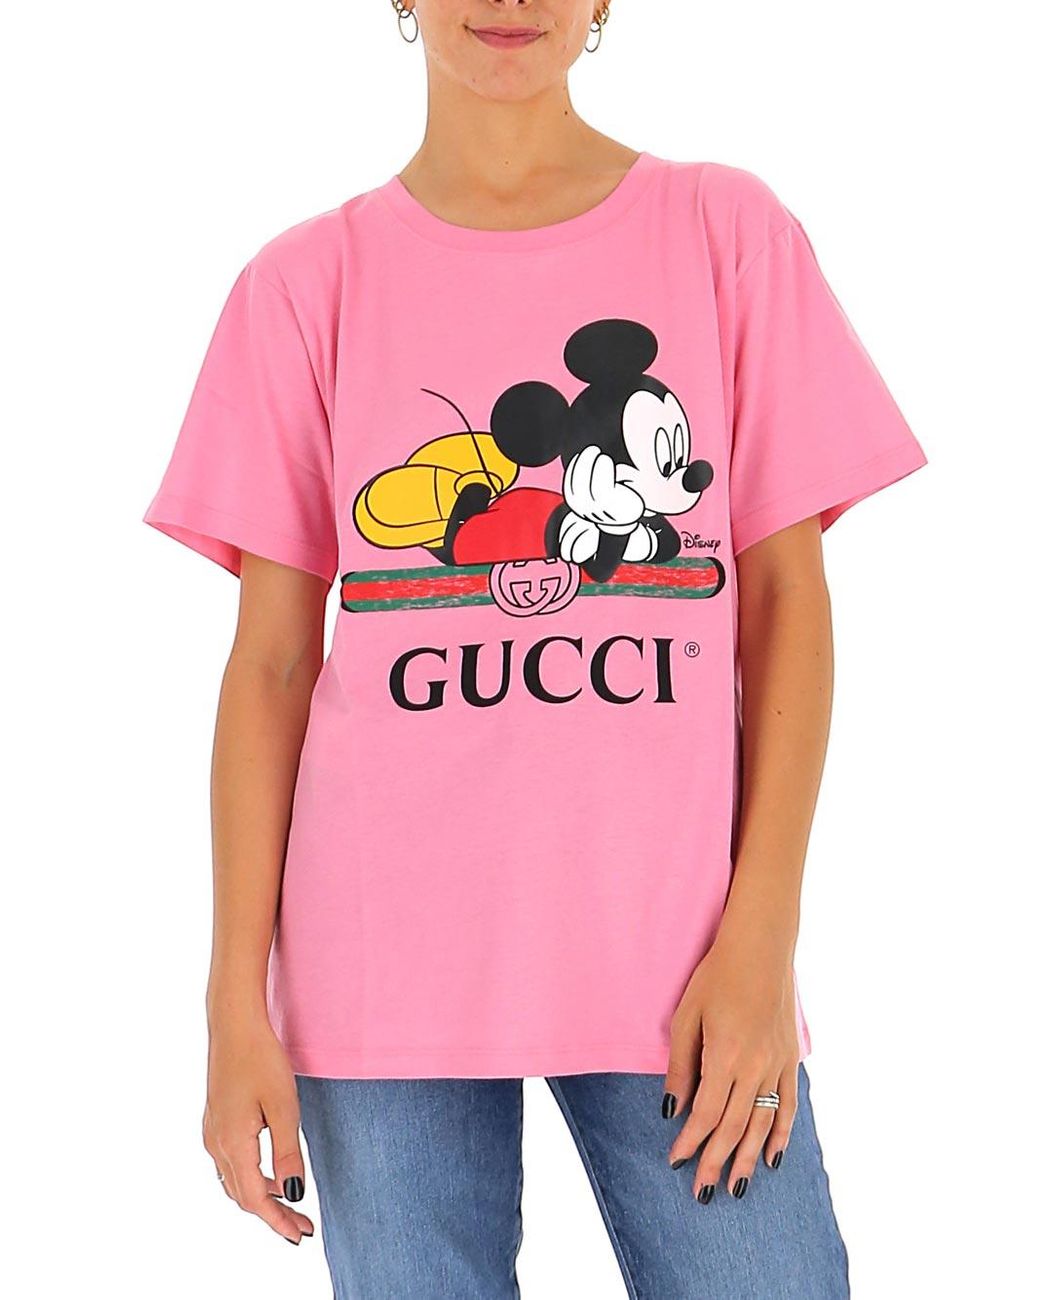 Gucci Disney X Oversize T-shirt in Pink | Lyst